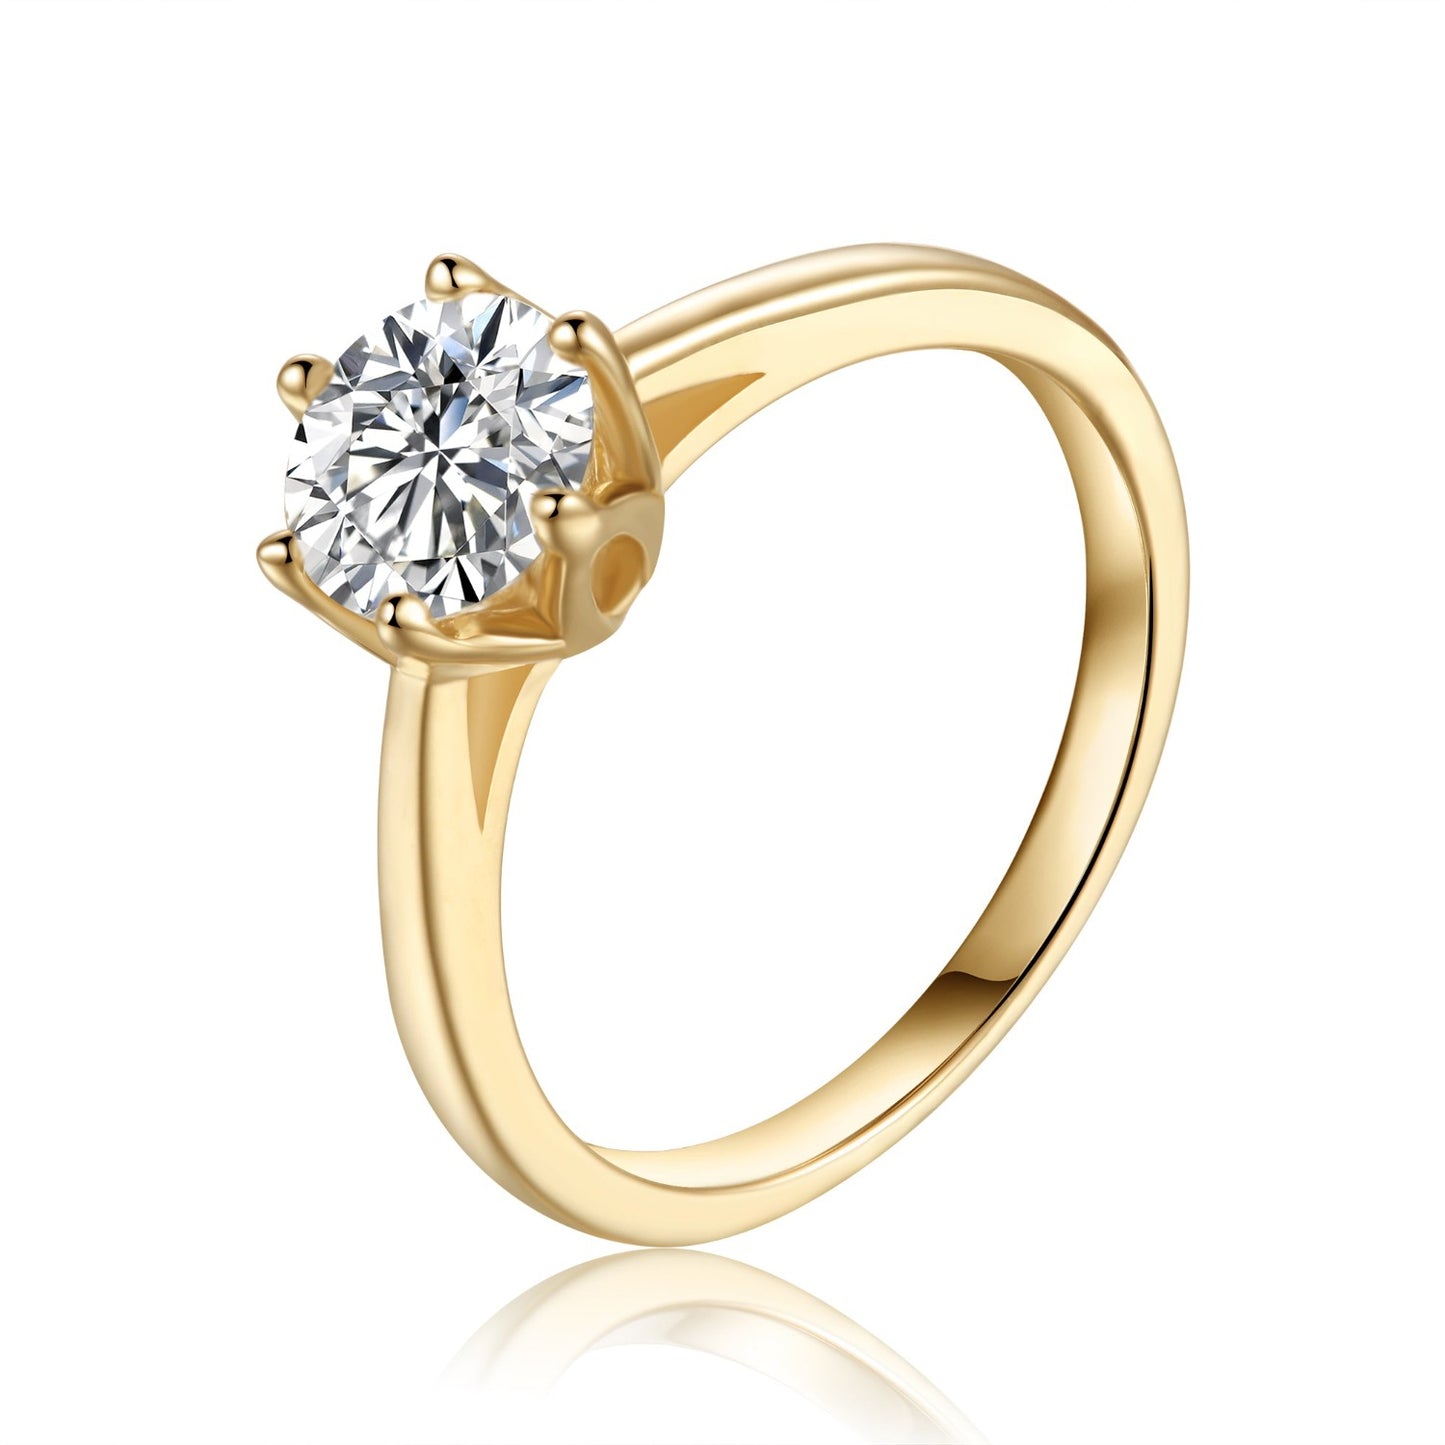 Solitaire 6 Claw Floral Basket 1.00ct Moissanite Engagement Ring Set in 9ct Yellow Gold